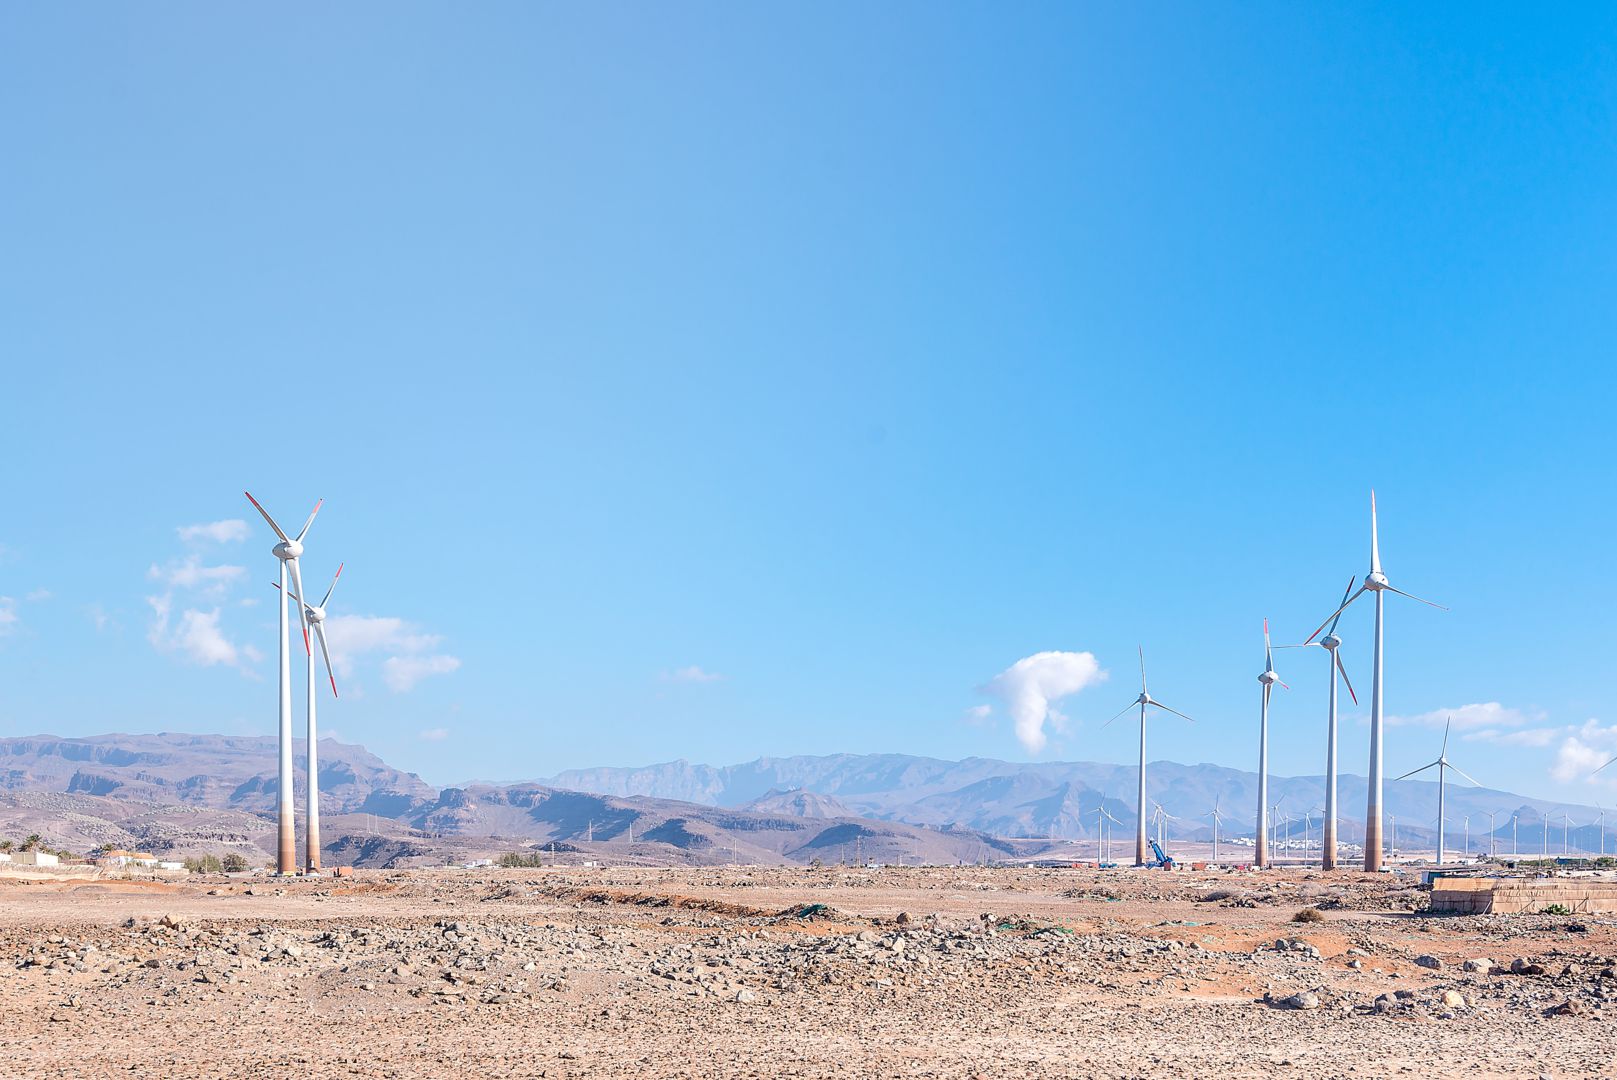 Ecoener connects El Rodeo wind farm, showcasing pioneering wind turbines in their category